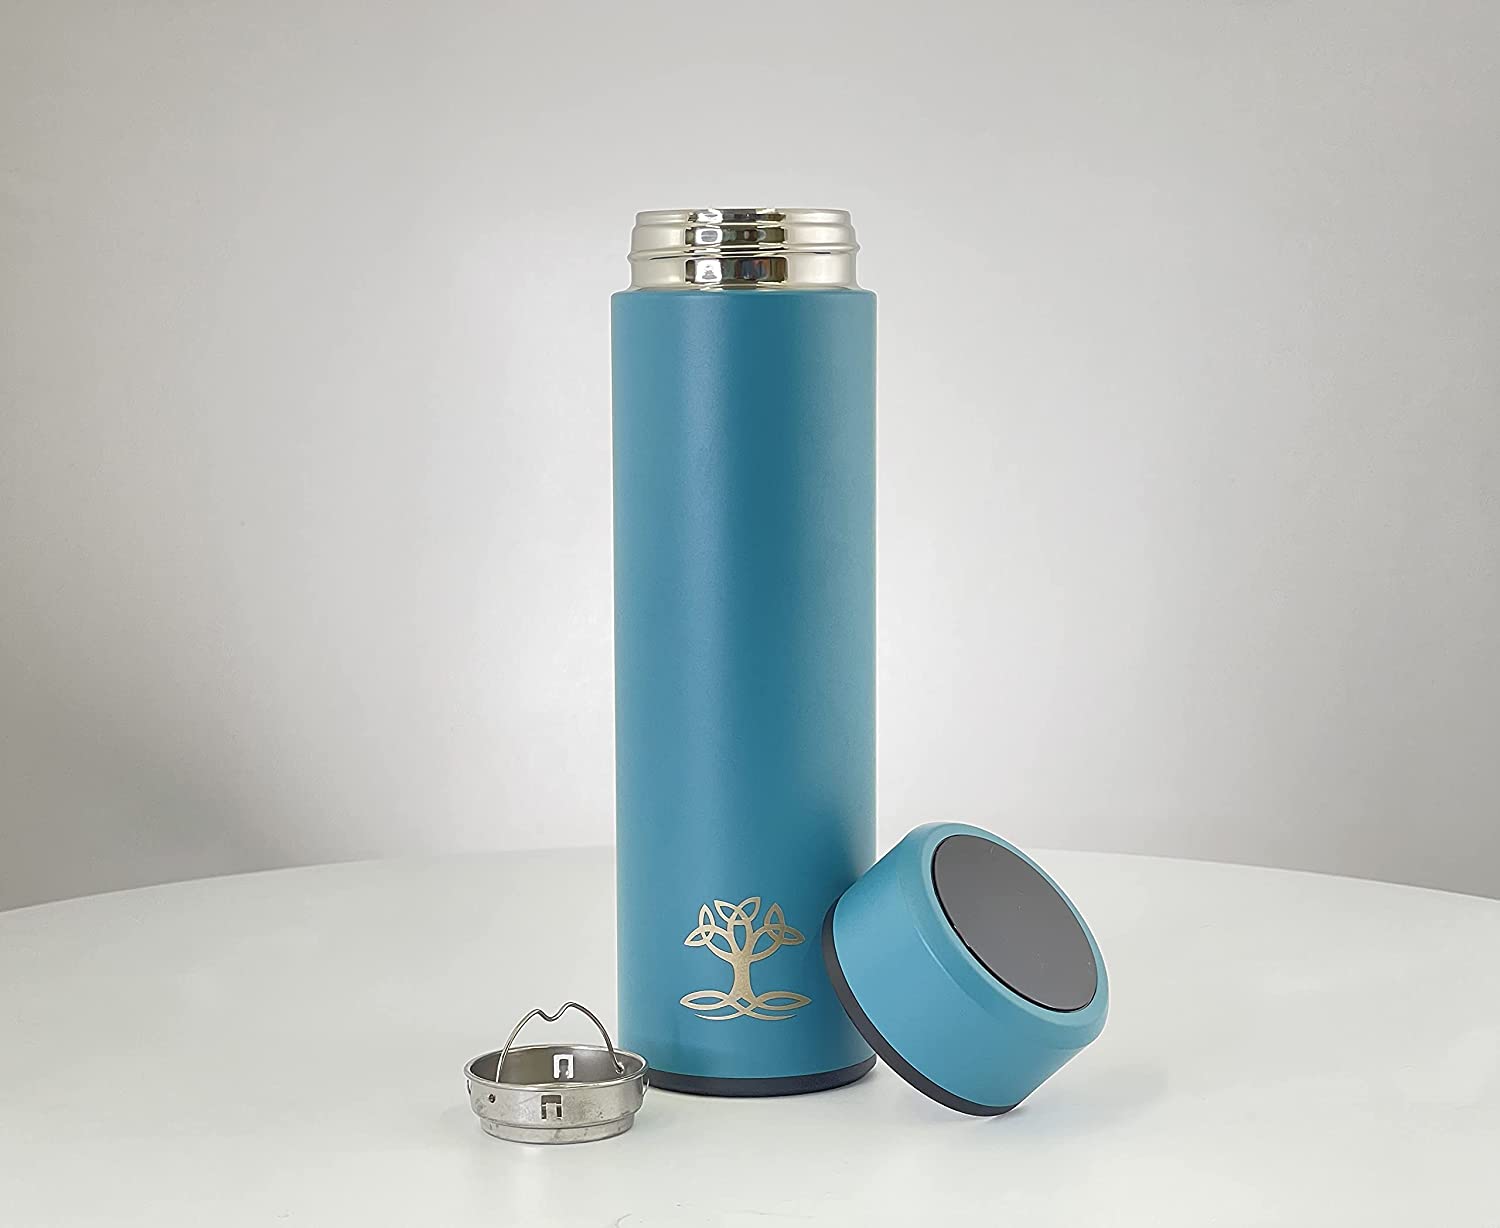 TEMPERATURE LED STAINLESS STEEL WATER BOTTLE